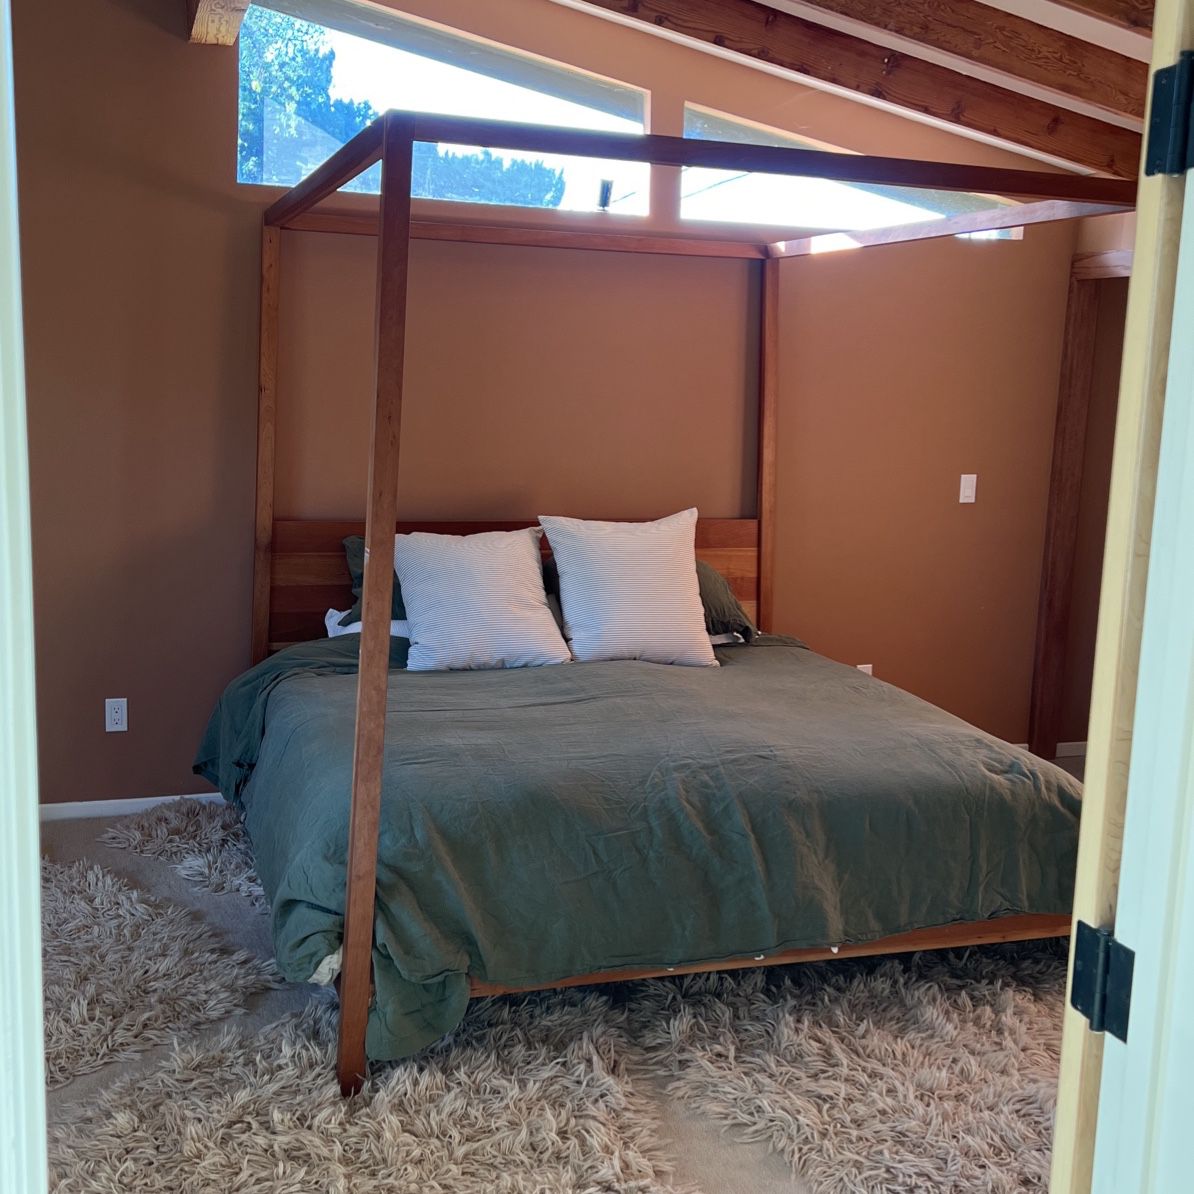 Four Post Canopy King Size Bed- Room And Board “hale”  Valued At $3500